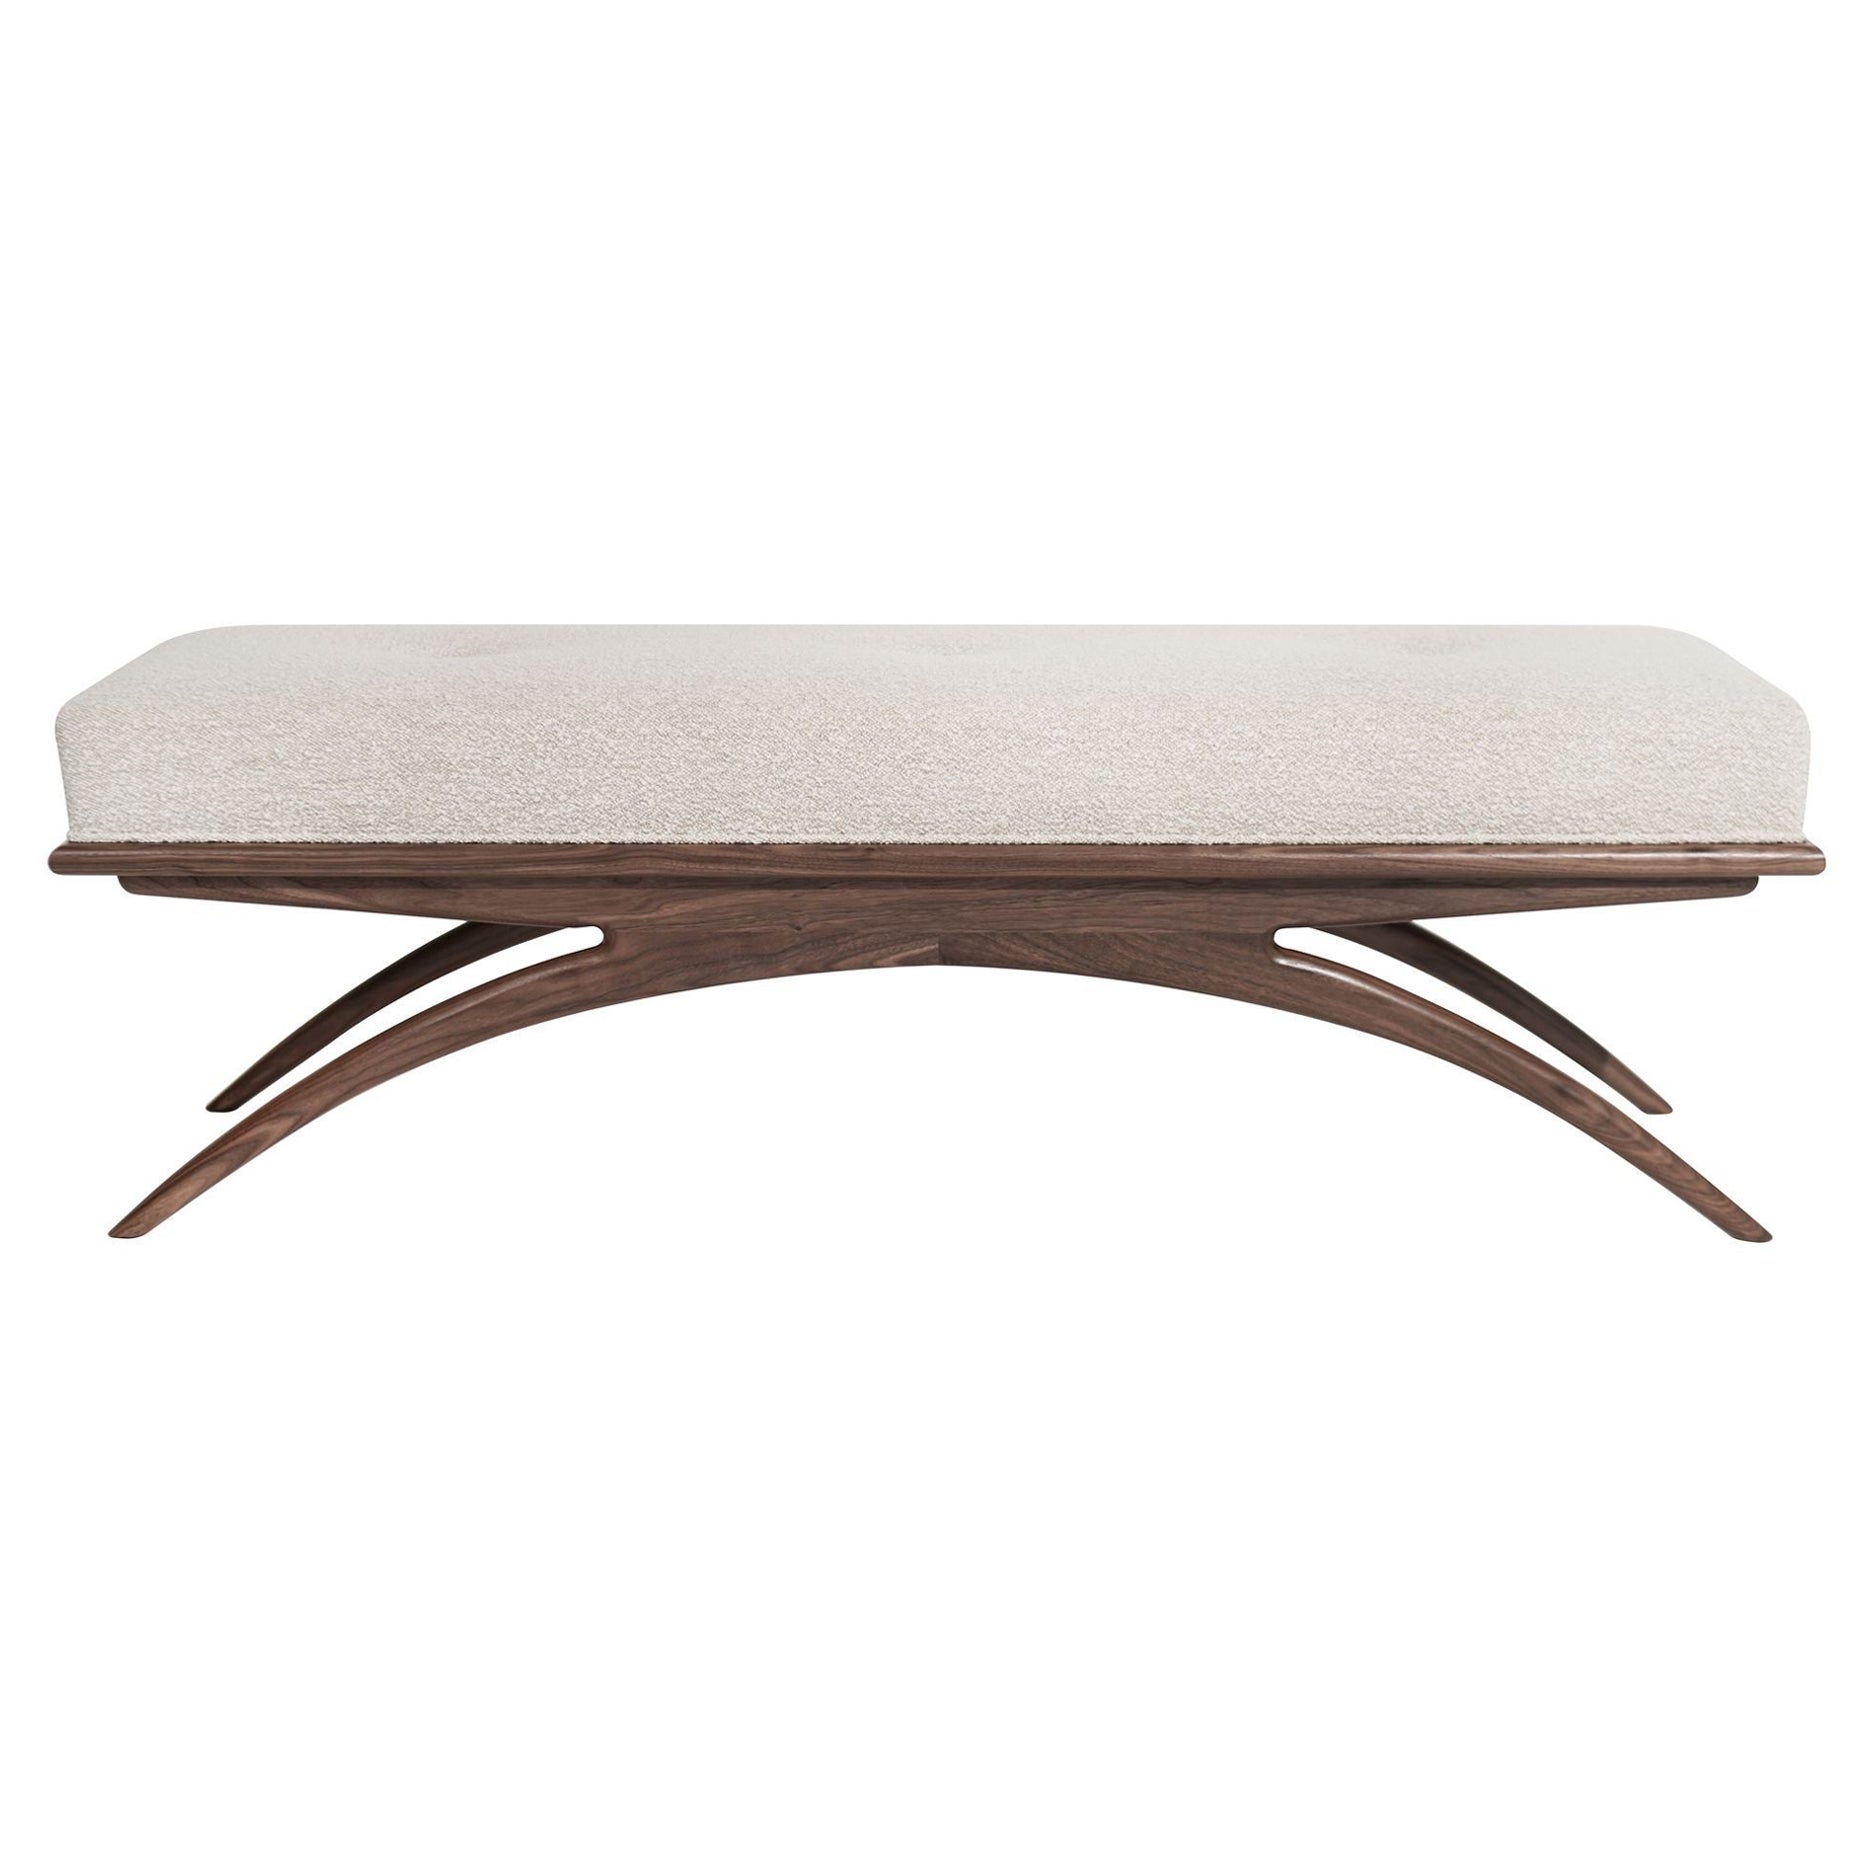 Convex Bench Series 60 in Natural Walnut For Sale